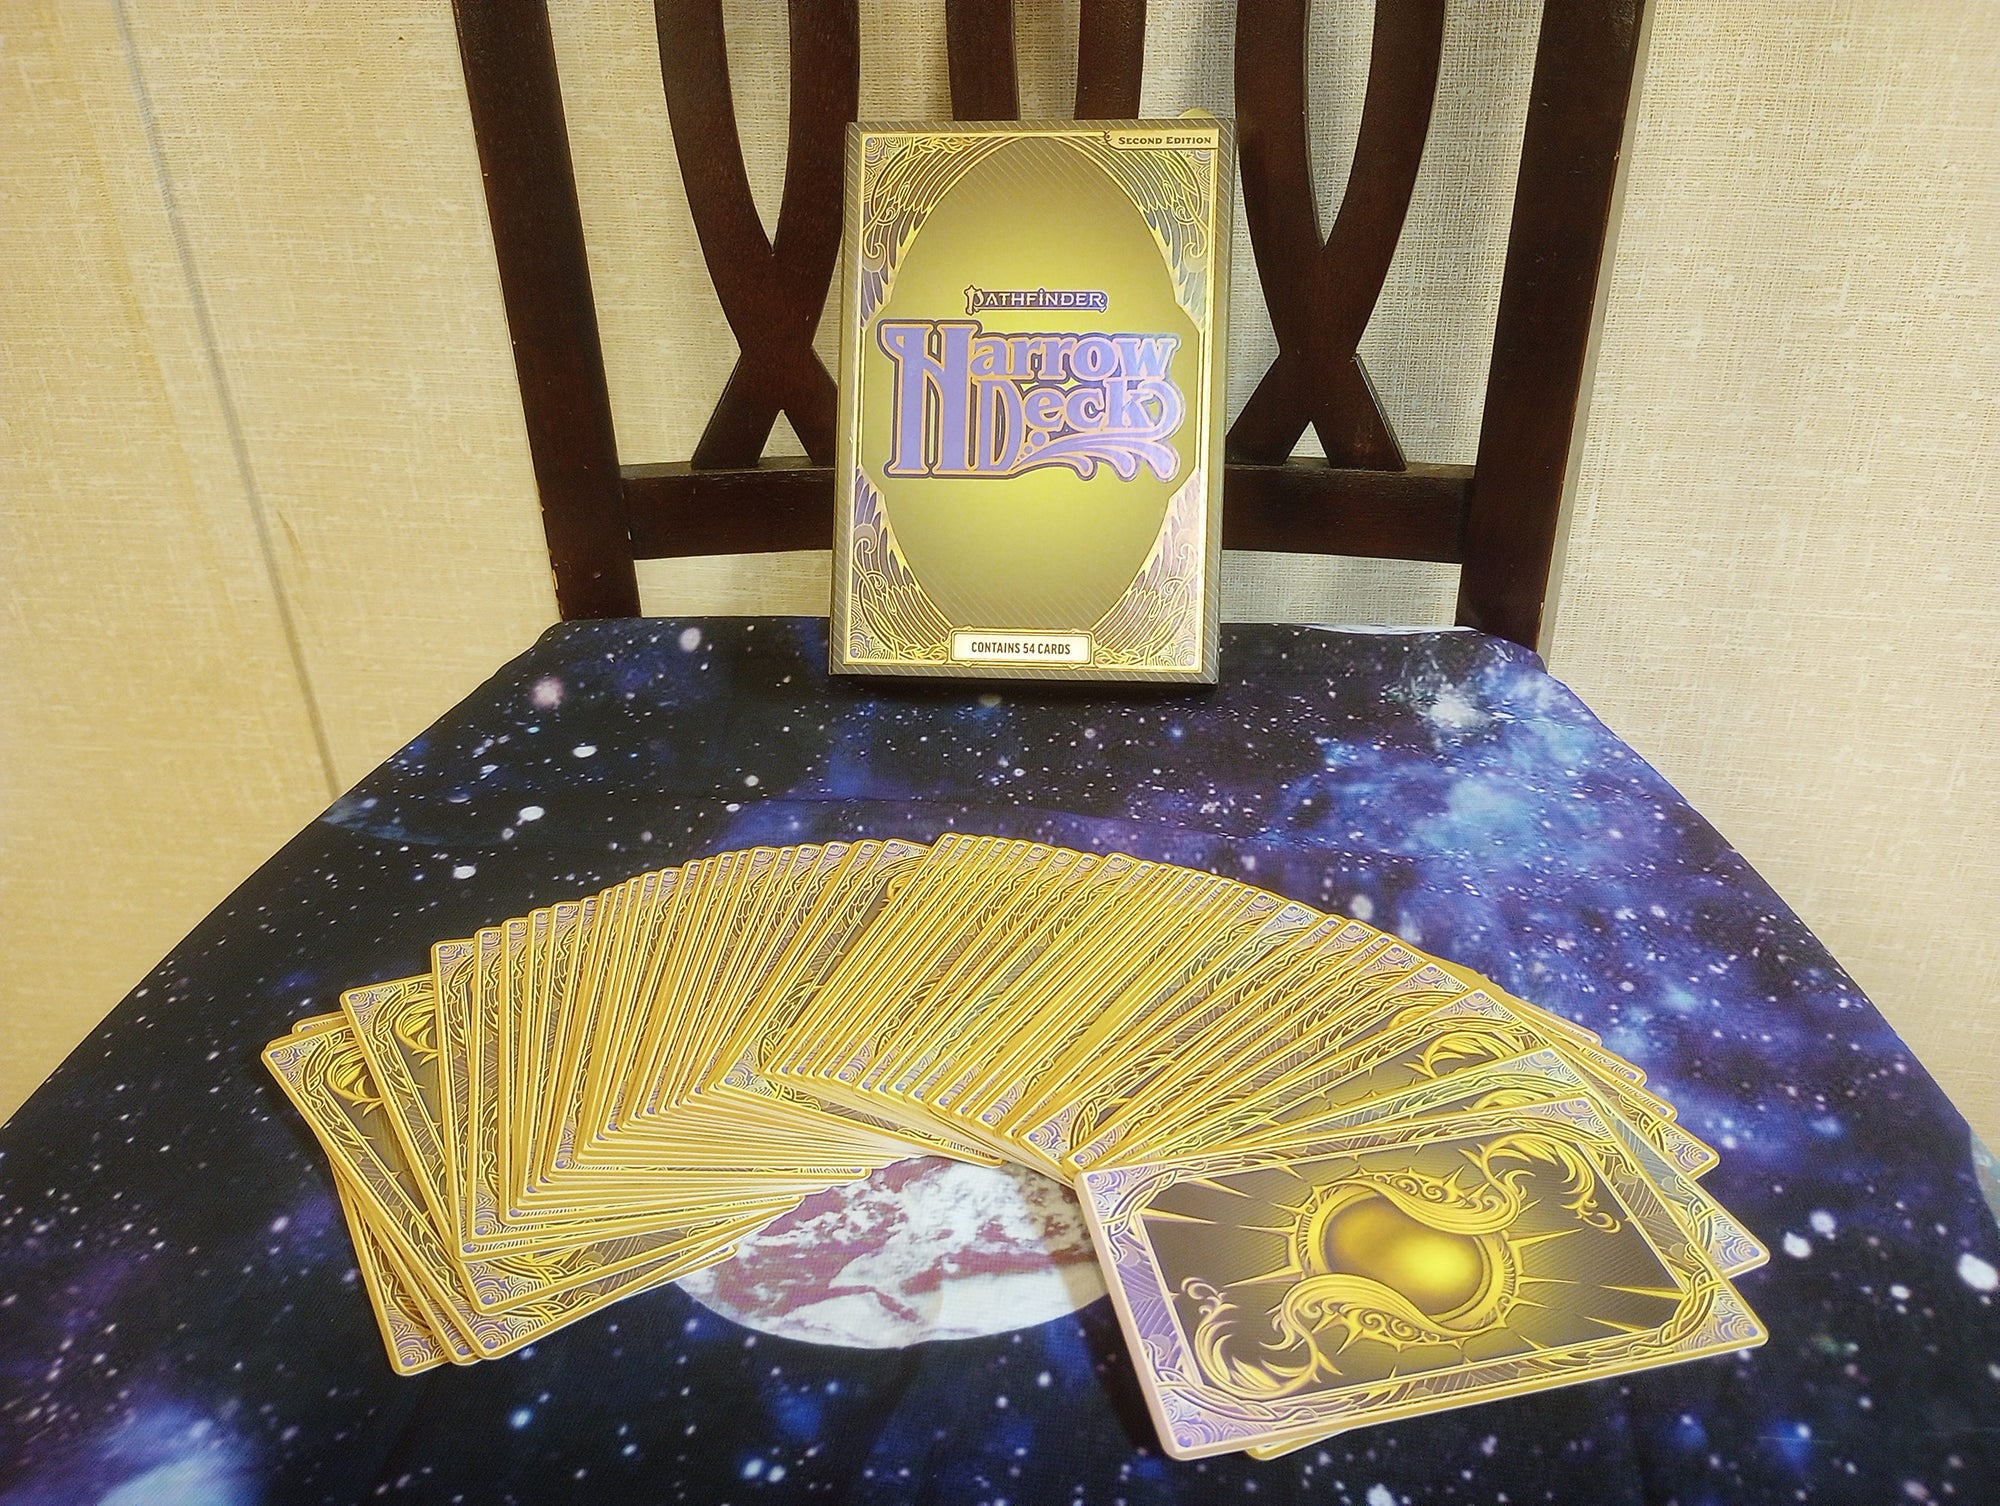 The Harrow Deck spread out across an alter cloth facedown, in front of the box.